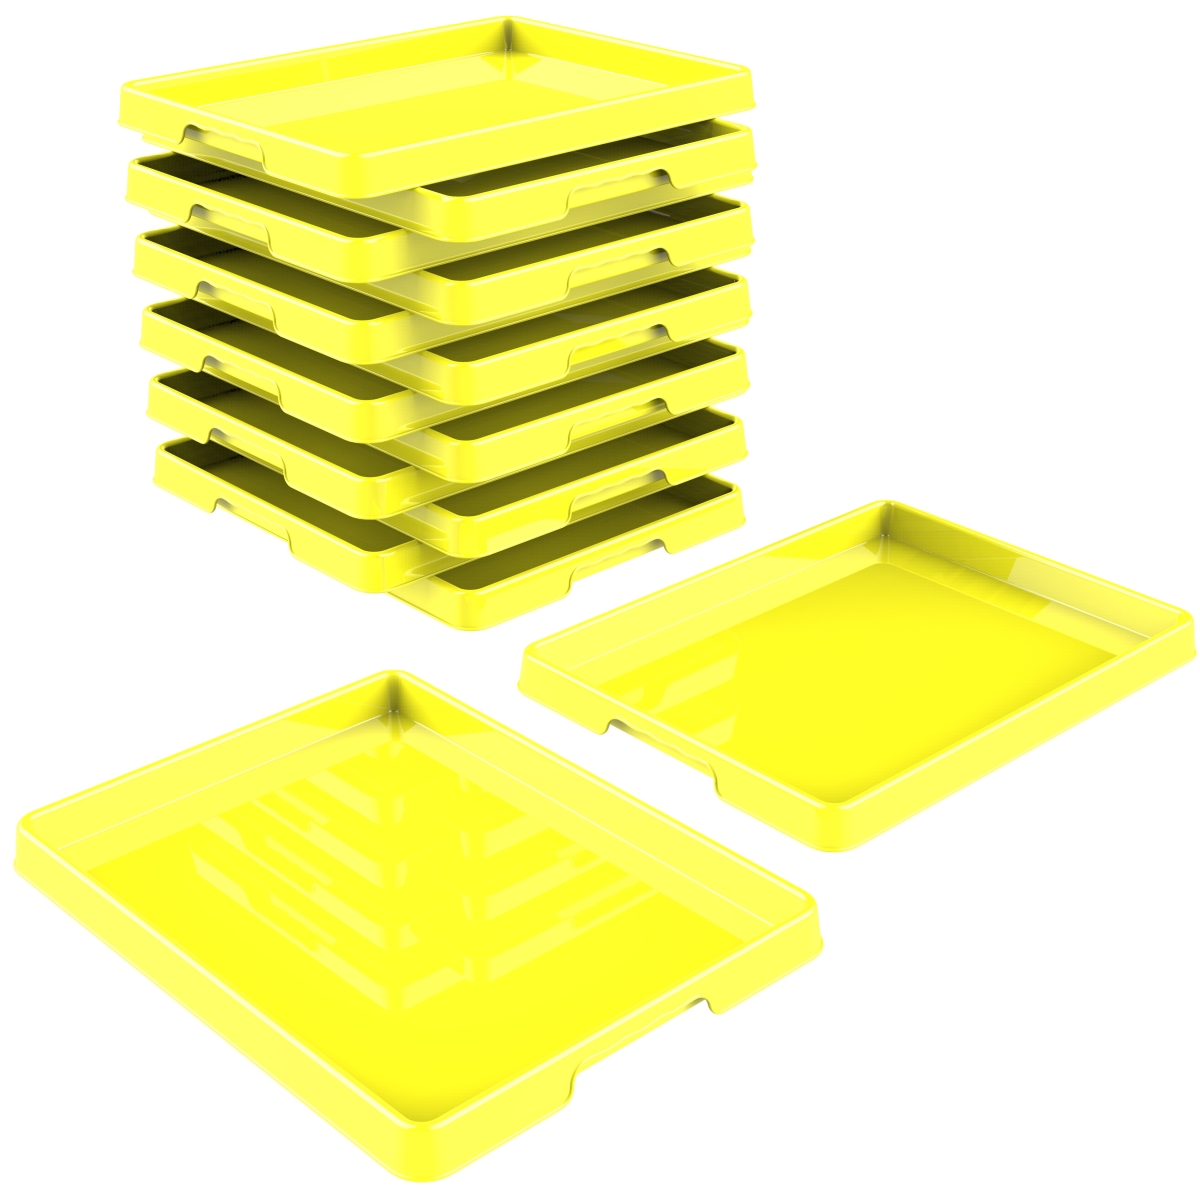 00445e12c 12 X 16 In. Sorting & Crafts Tray, Yellow - Pack Of 12